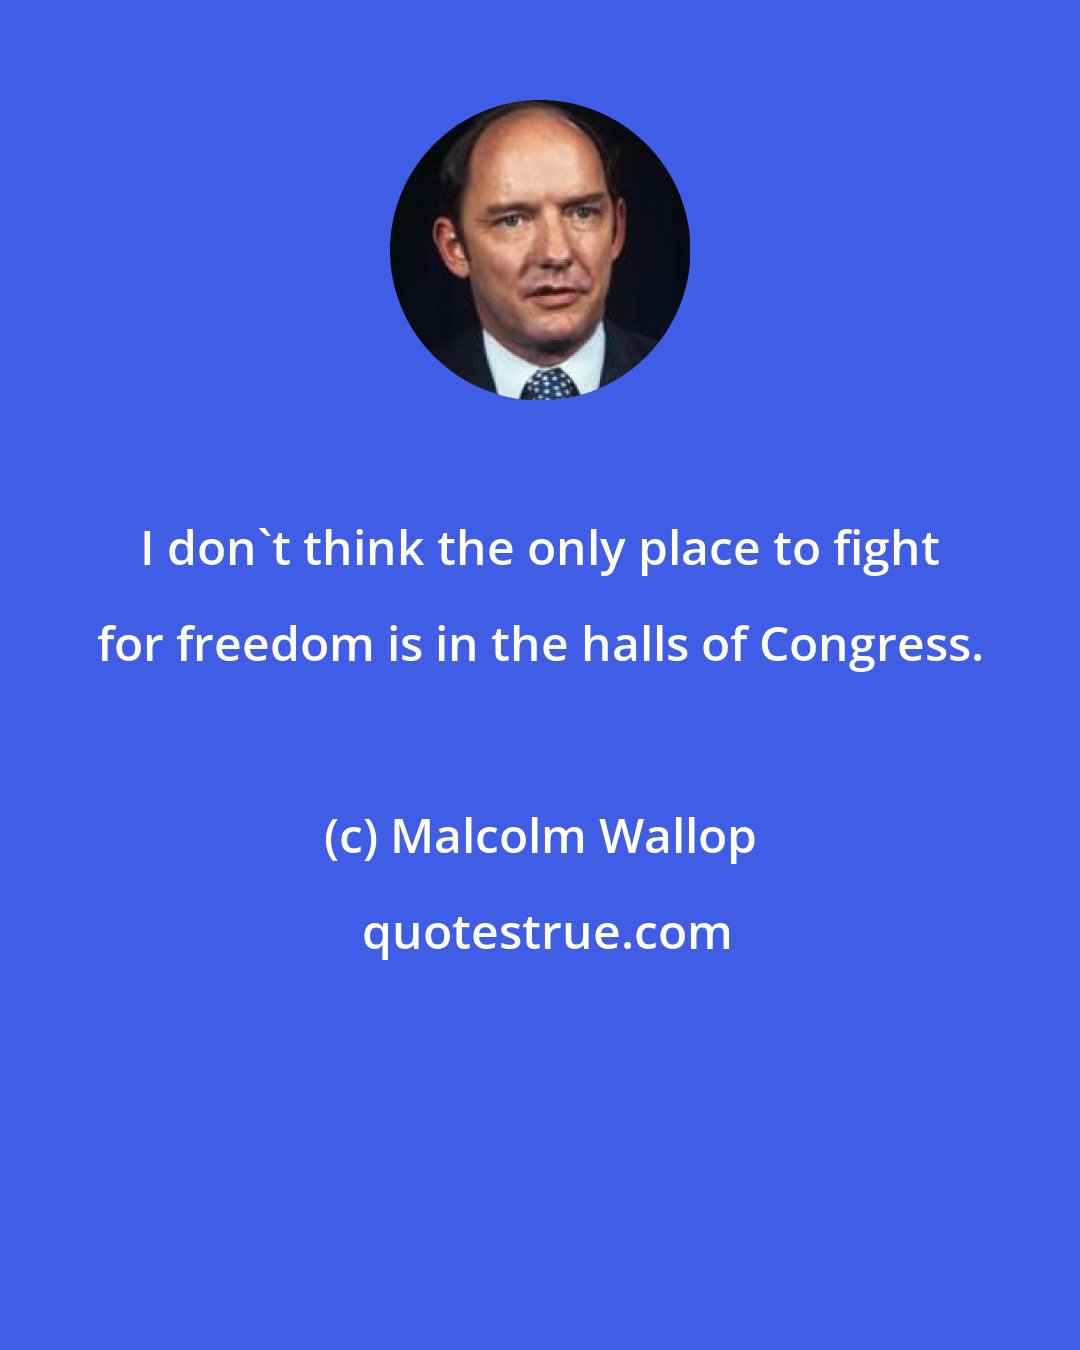 Malcolm Wallop: I don't think the only place to fight for freedom is in the halls of Congress.